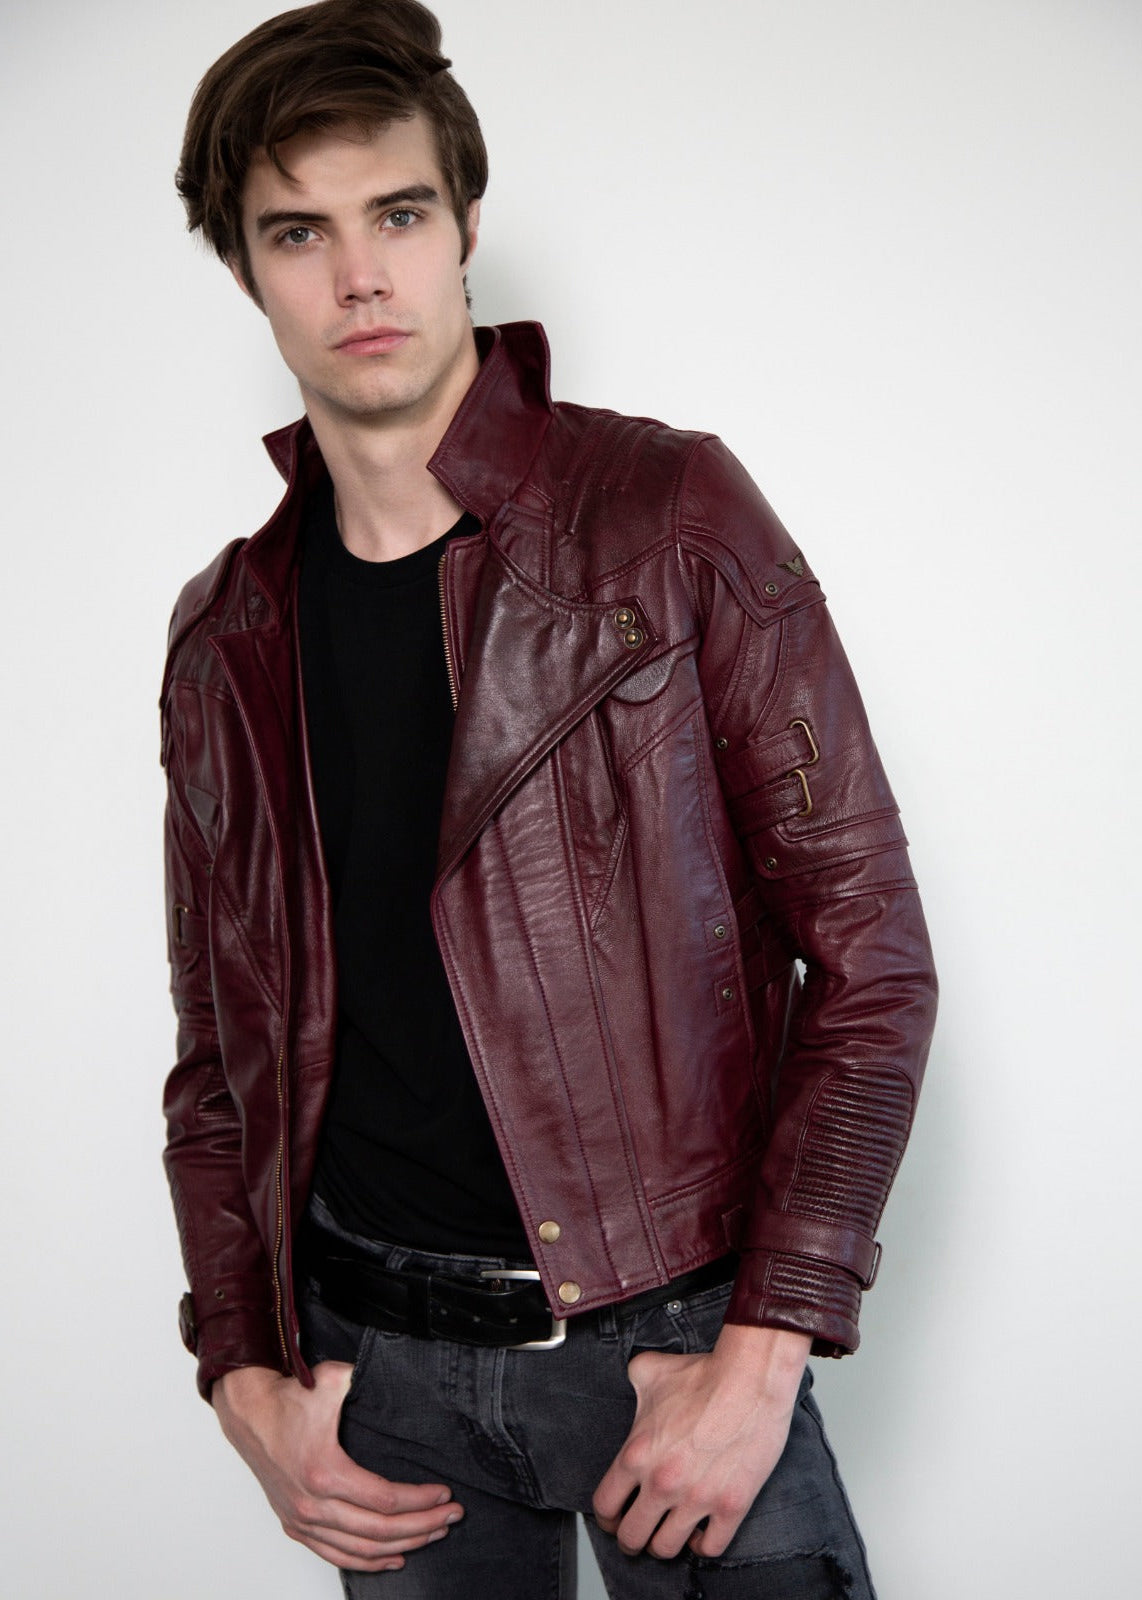 Star-Lord Guardians of the Galaxy Mens Leather Jacket